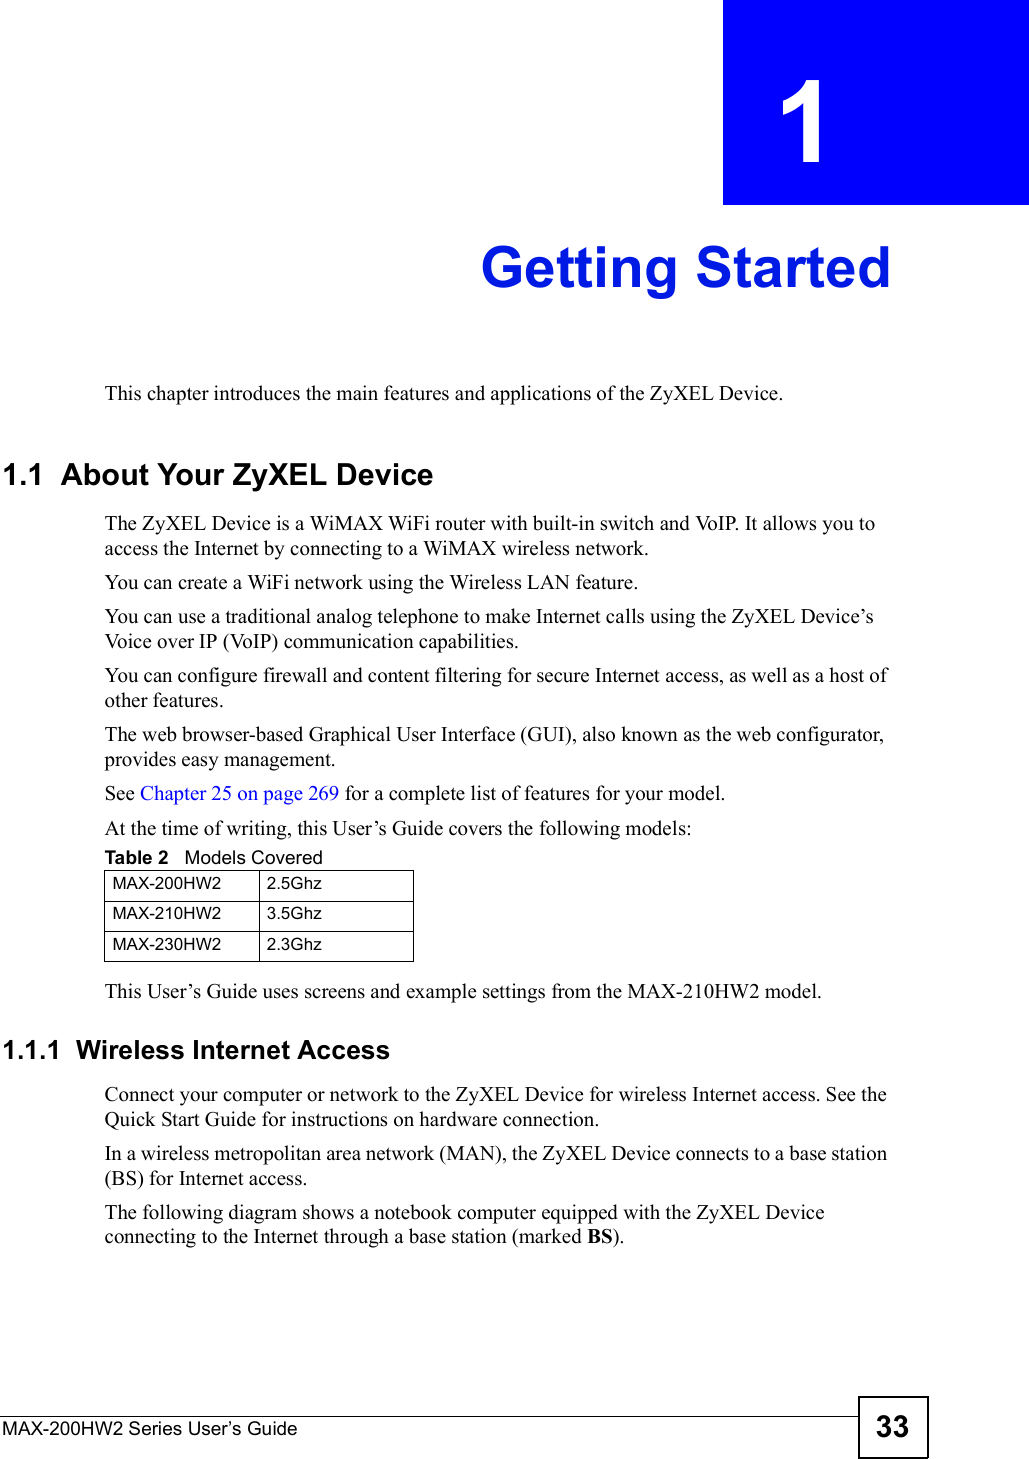 MAX-200HW2 Series User s Guide 33CHAPTER  1 Getting StartedThis chapter introduces the main features and applications of the ZyXEL Device.1.1  About Your ZyXEL Device    The ZyXEL Device is a WiMAX WiFi router with built-in switch and VoIP. It allows you to access the Internet by connecting to a WiMAX wireless network. You can create a WiFi network using the Wireless LAN feature.You can use a traditional analog telephone to make Internet calls using the ZyXEL Device!s Voice over IP (VoIP) communication capabilities. You can configure firewall and content filtering for secure Internet access, as well as a host of other features. The web browser-based Graphical User Interface (GUI), also known as the web configurator, provides easy management.See Chapter 25 on page 269 for a complete list of features for your model.At the time of writing, this User!s Guide covers the following models:This User!s Guide uses screens and example settings from the MAX-210HW2 model.1.1.1  Wireless Internet AccessConnect your computer or network to the ZyXEL Device for wireless Internet access. See the Quick Start Guide for instructions on hardware connection.In a wireless metropolitan area network (MAN), the ZyXEL Device connects to a base station (BS) for Internet access. The following diagram shows a notebook computer equipped with the ZyXEL Device connecting to the Internet through a base station (marked BS).Table 2   Models CoveredMAX-200HW22.5GhzMAX-210HW23.5GhzMAX-230HW22.3Ghz